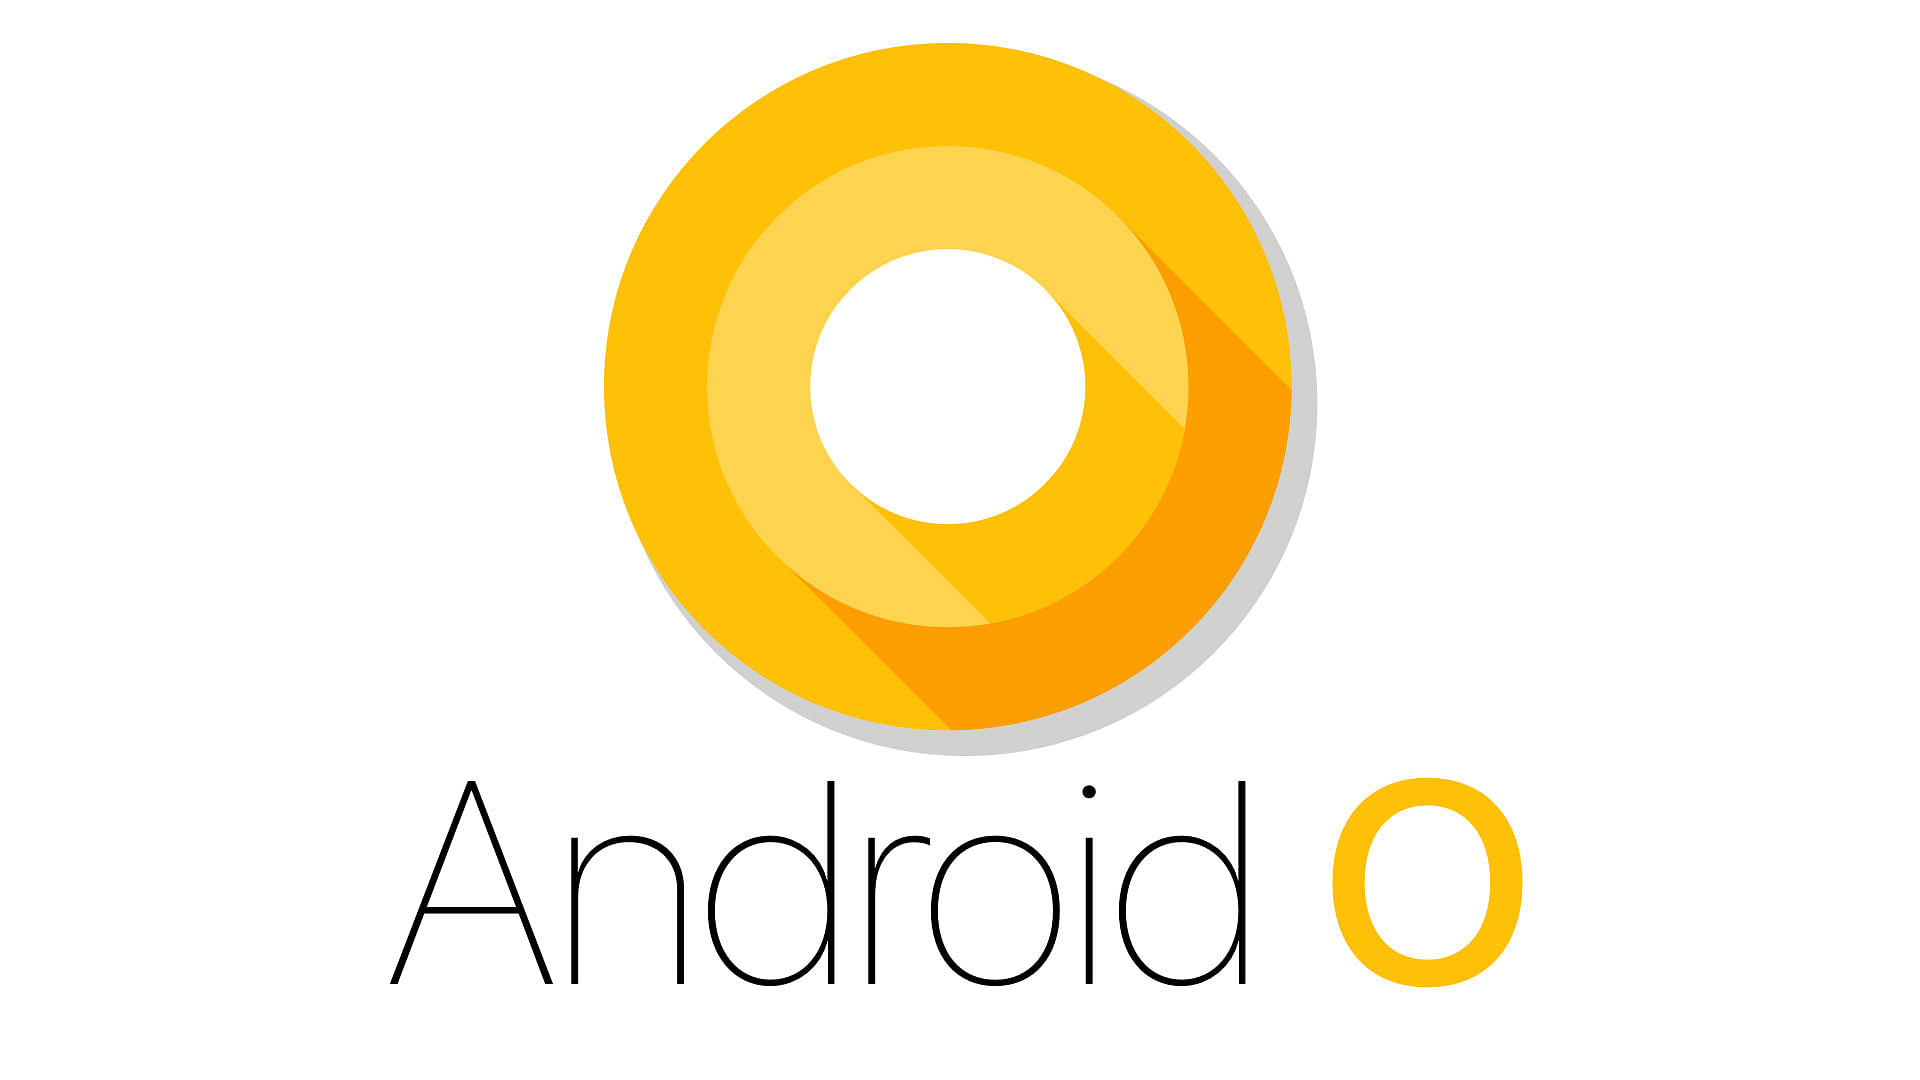 

Google will publicly unveil Android 8 version at Google I/O this month. (Photo Courtesy: Google)